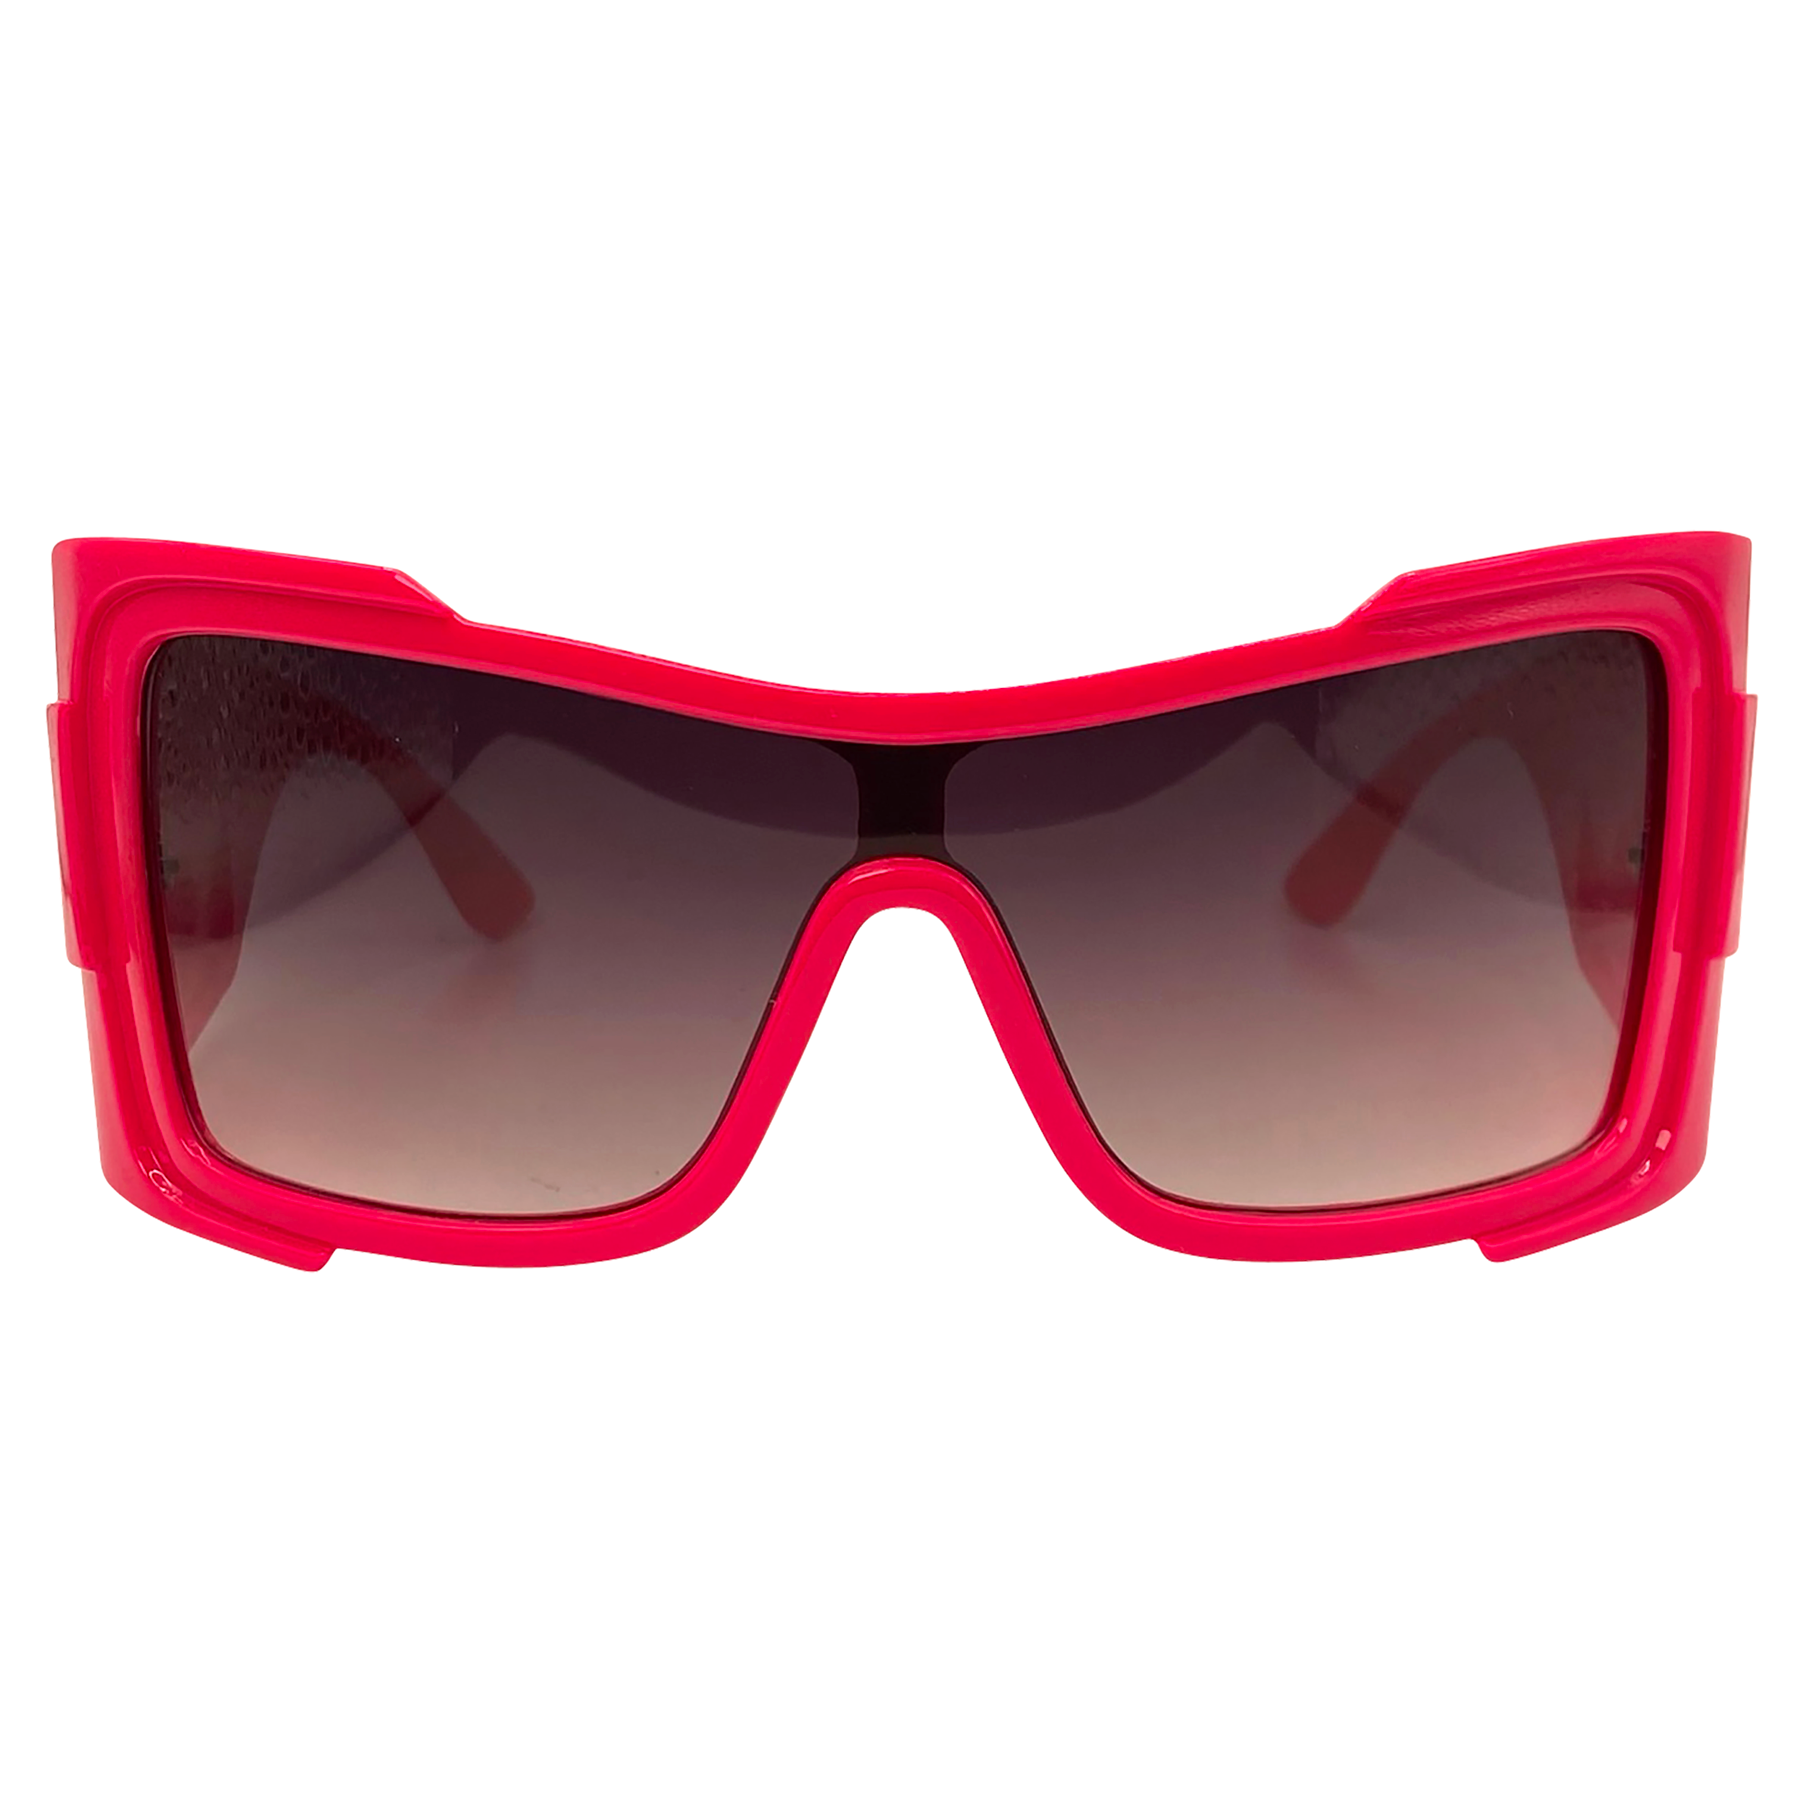 colored sunglasses with a hot pink oversized shield style with smoke lens